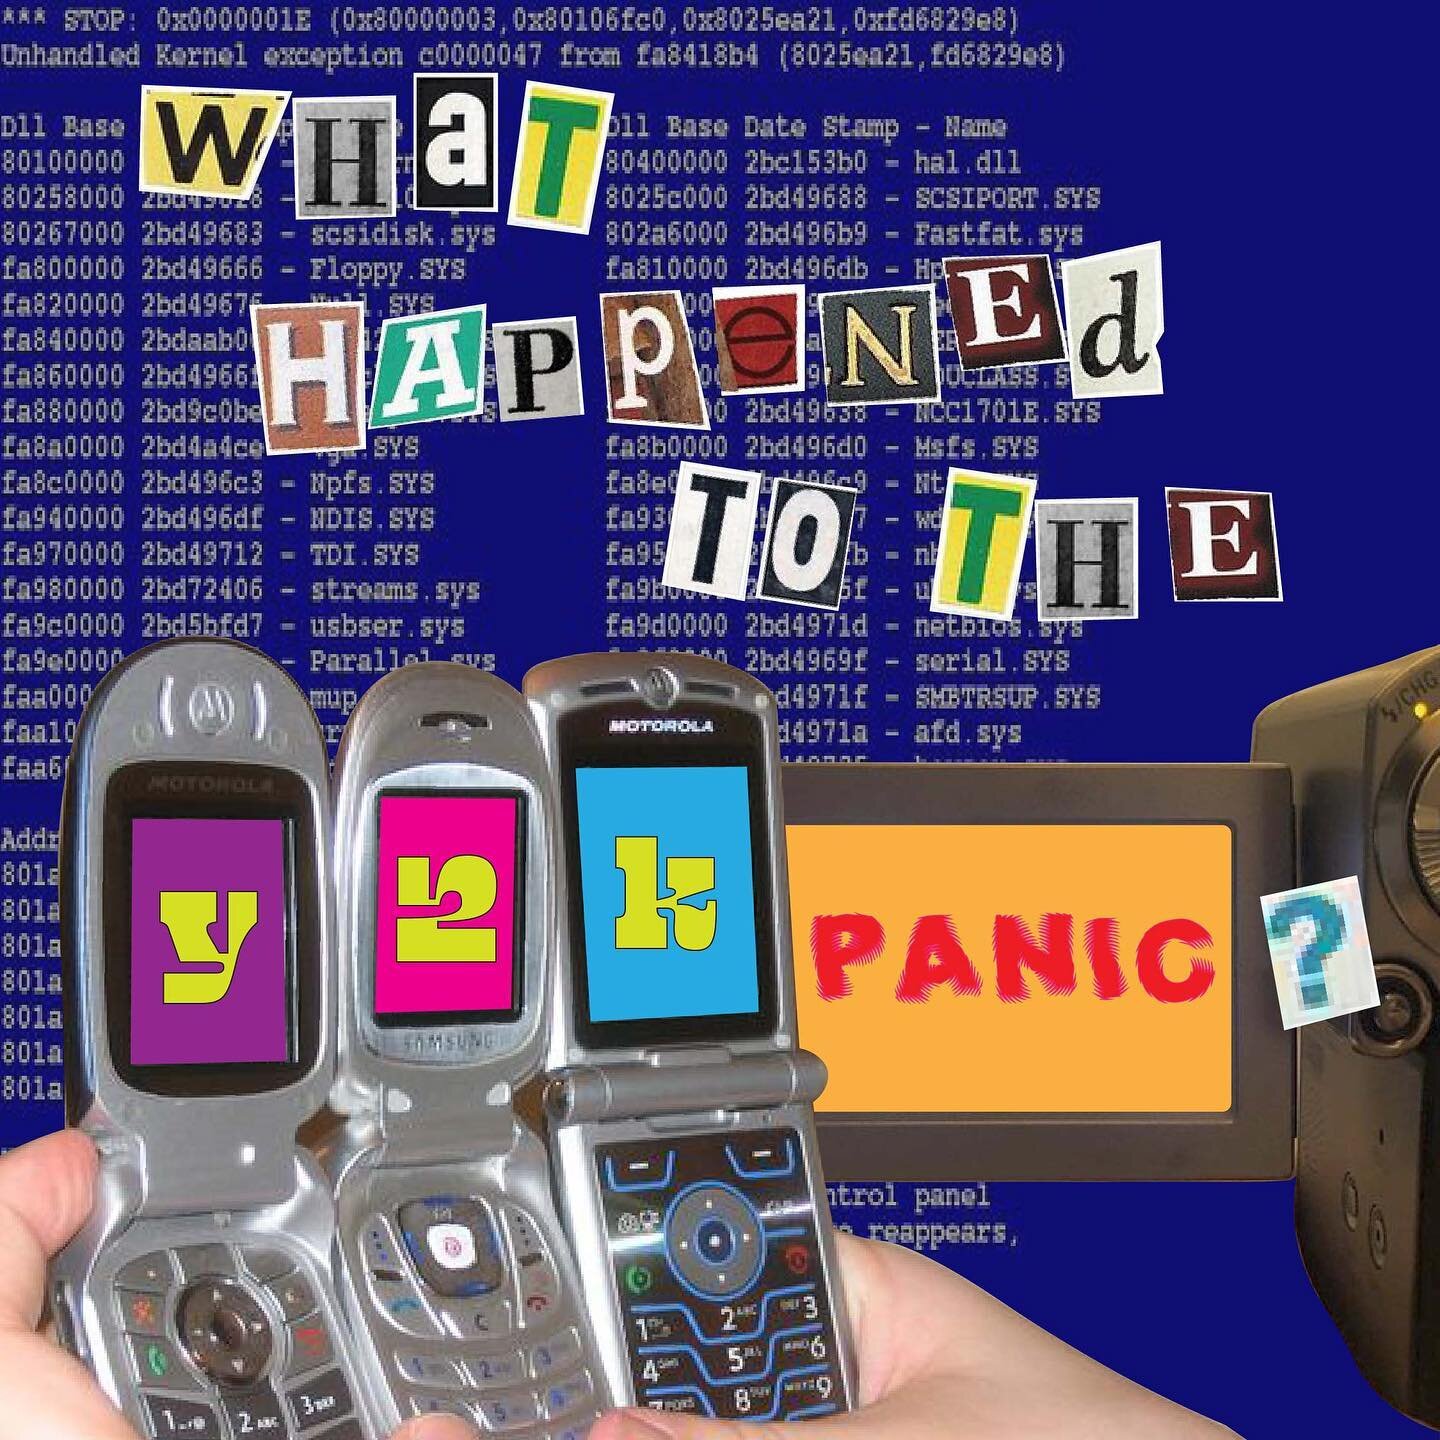 Media hype or crisis averted? With two decades of hindsight we now know the reality of the Y2K panic is more nuanced than either option. Swipe through our short synopsis of one of the largest pop-culture moments of the Digital Age, and check out our 